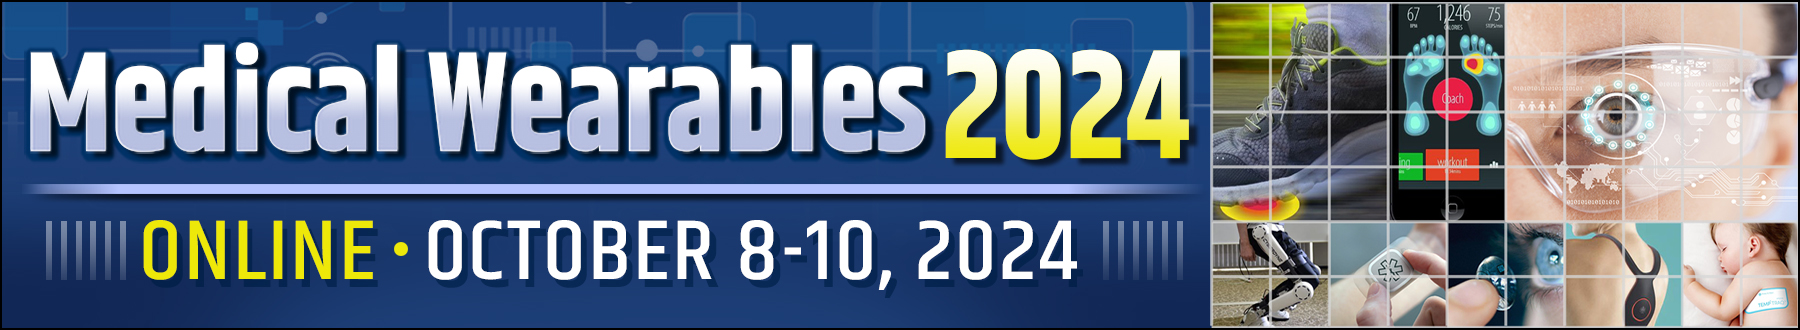 Medical Wearables Conference 2024